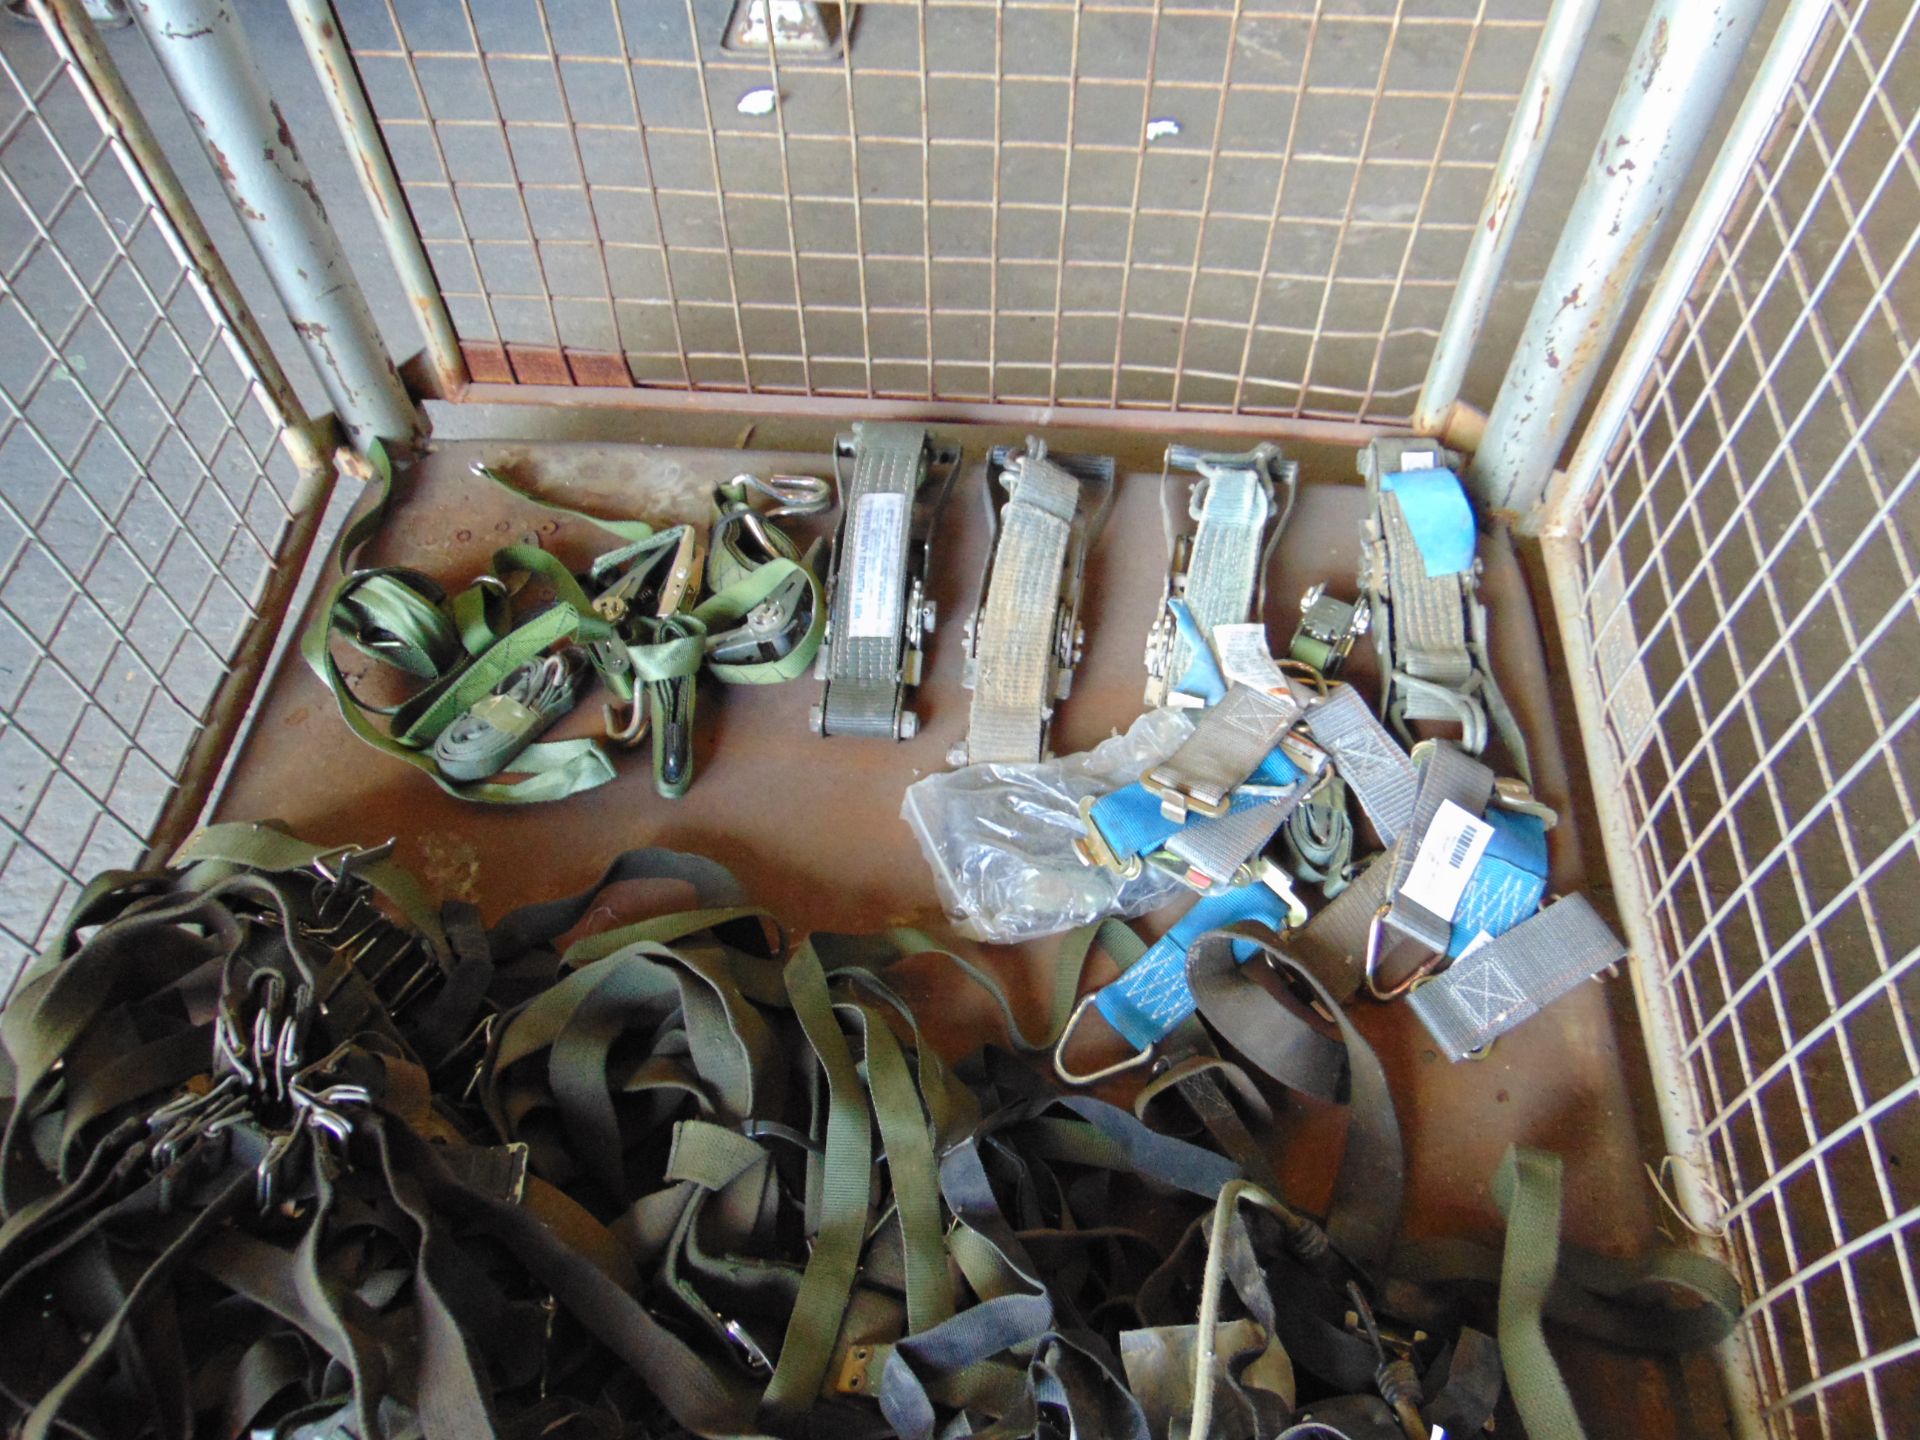 Stillage of Strapping, Ratchets etc. - Image 6 of 6